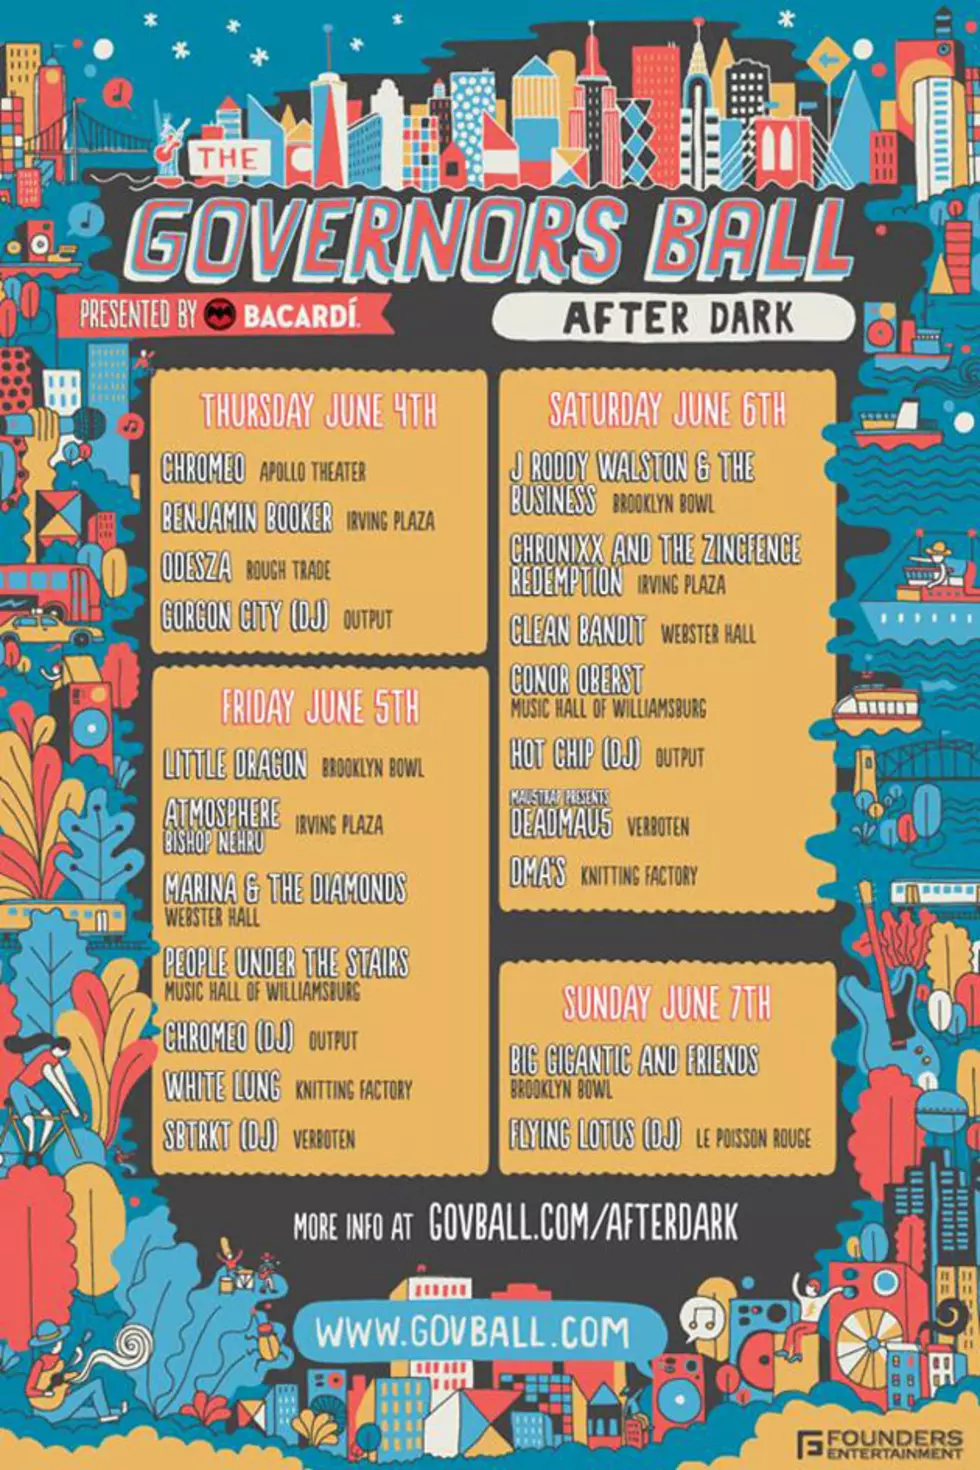 Governors Ball Announces 2015 After Dark Parties